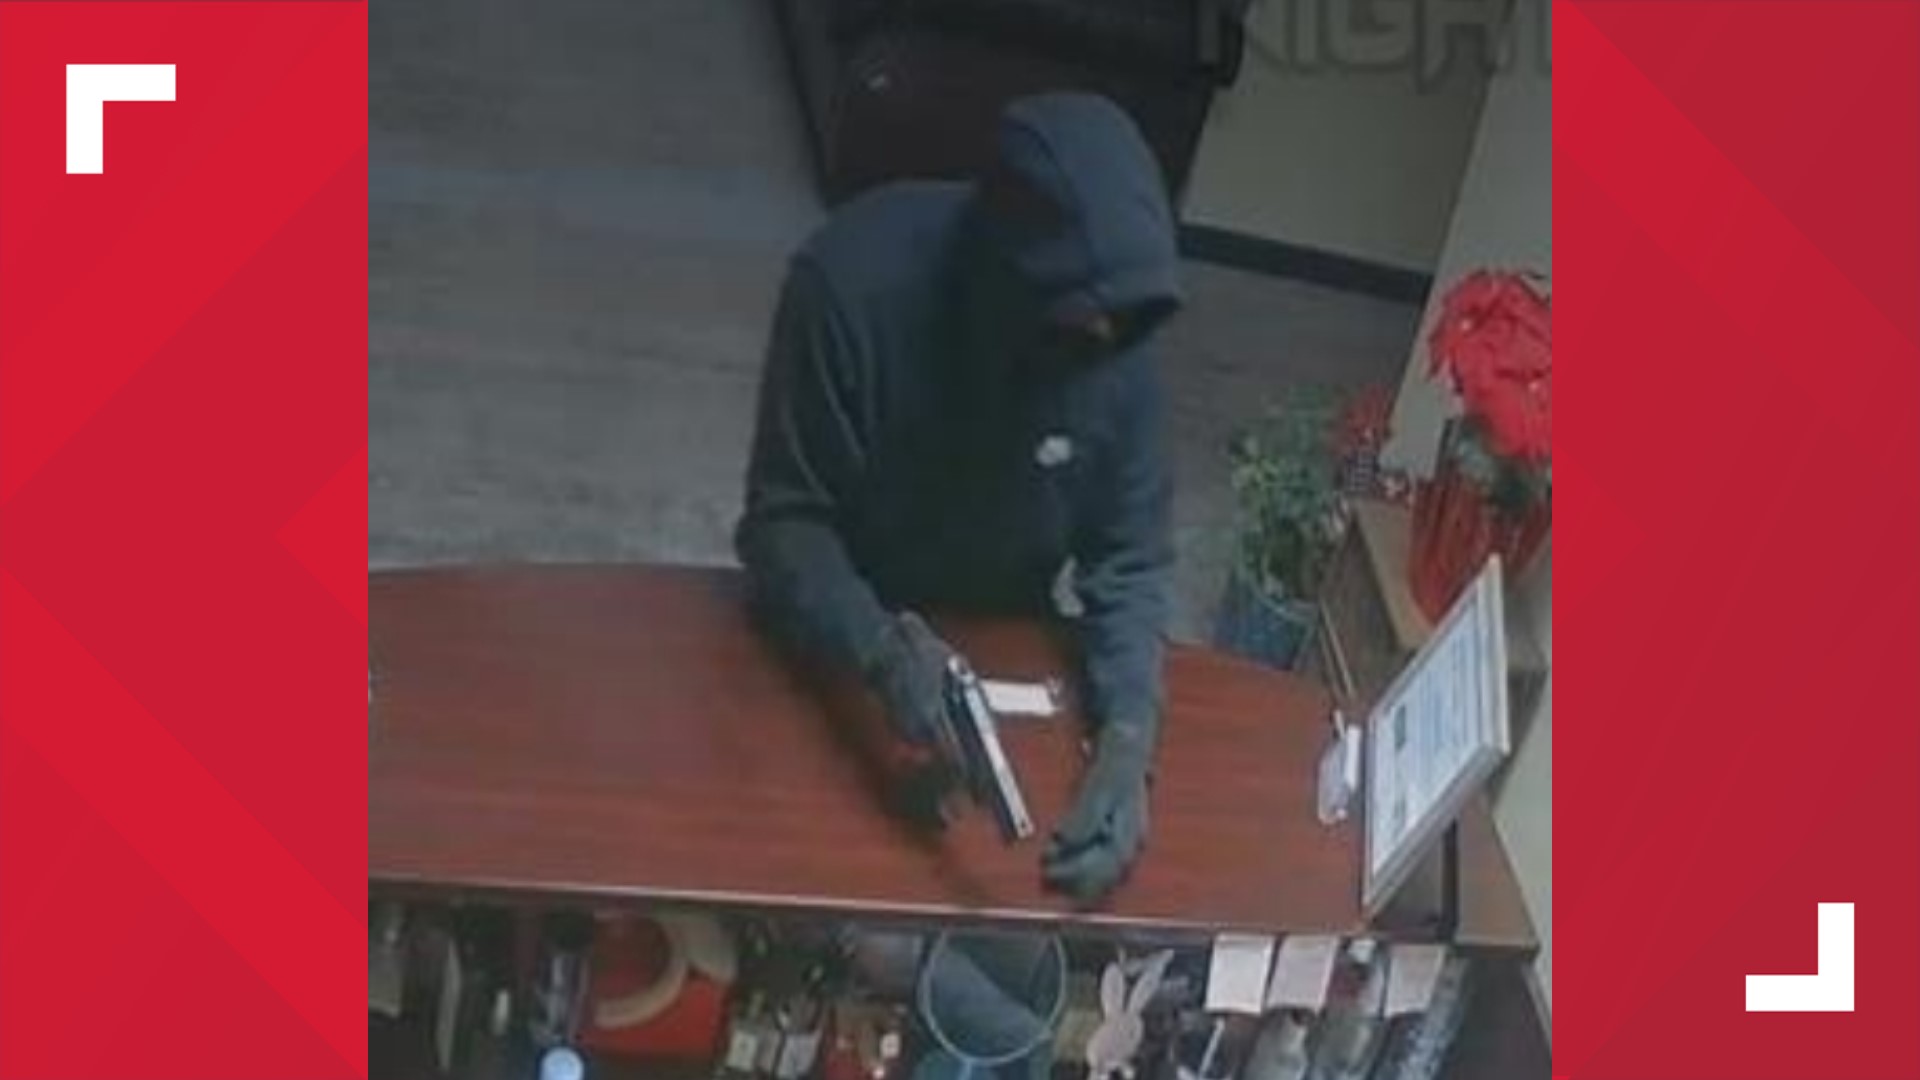 Anyone with information on the robbery at Relax Massage is encouraged to call the department at 432-685-7108.